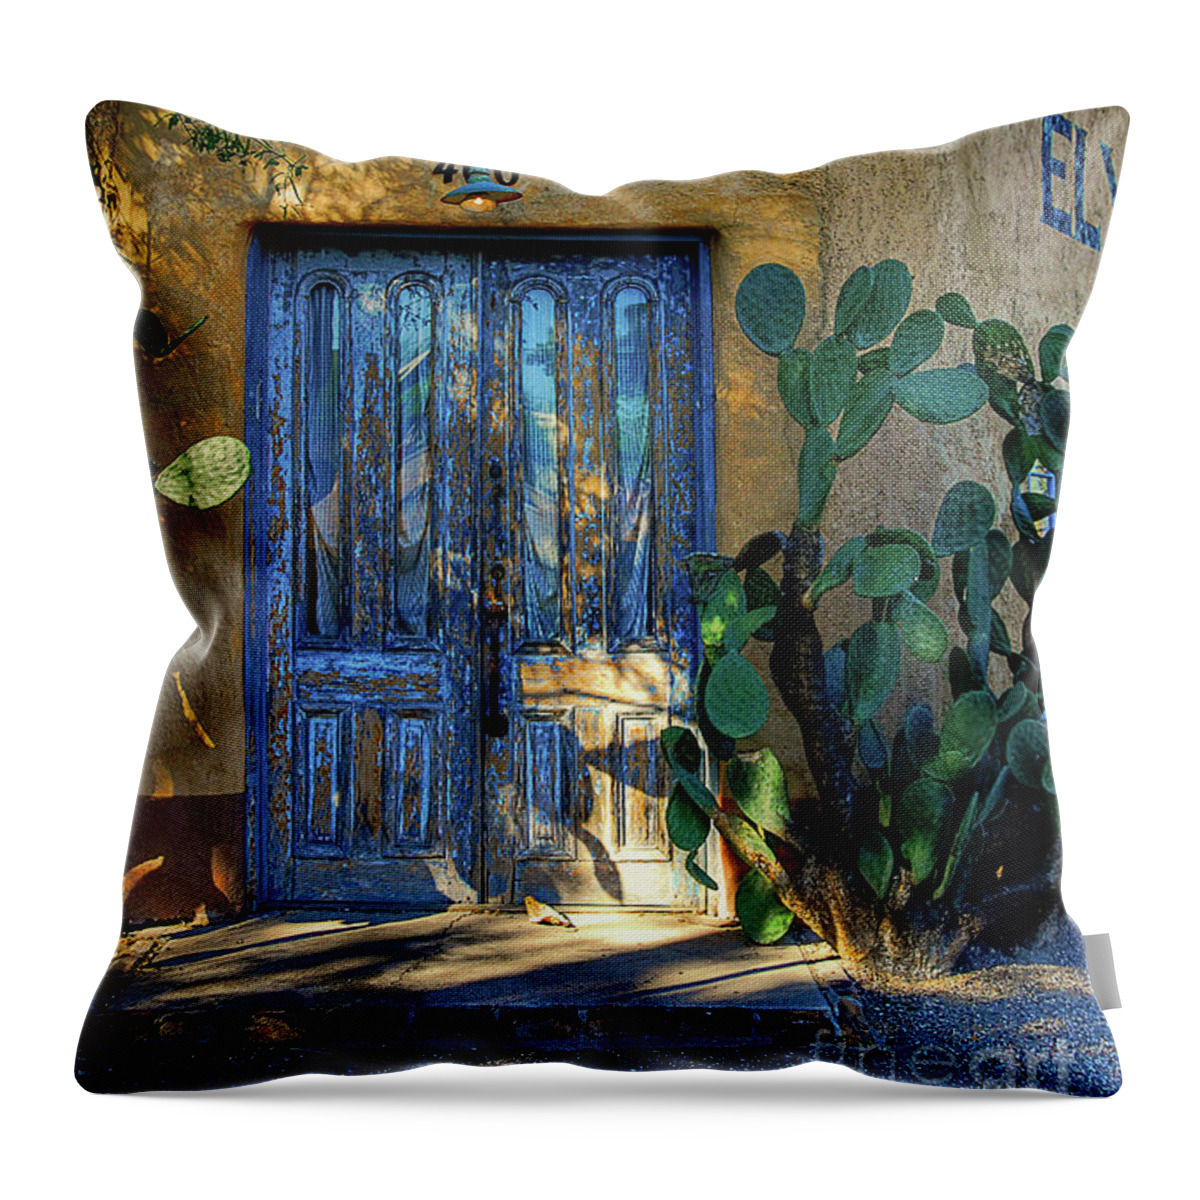 Door Throw Pillow featuring the photograph Elysian Grove In The Morning by Lois Bryan